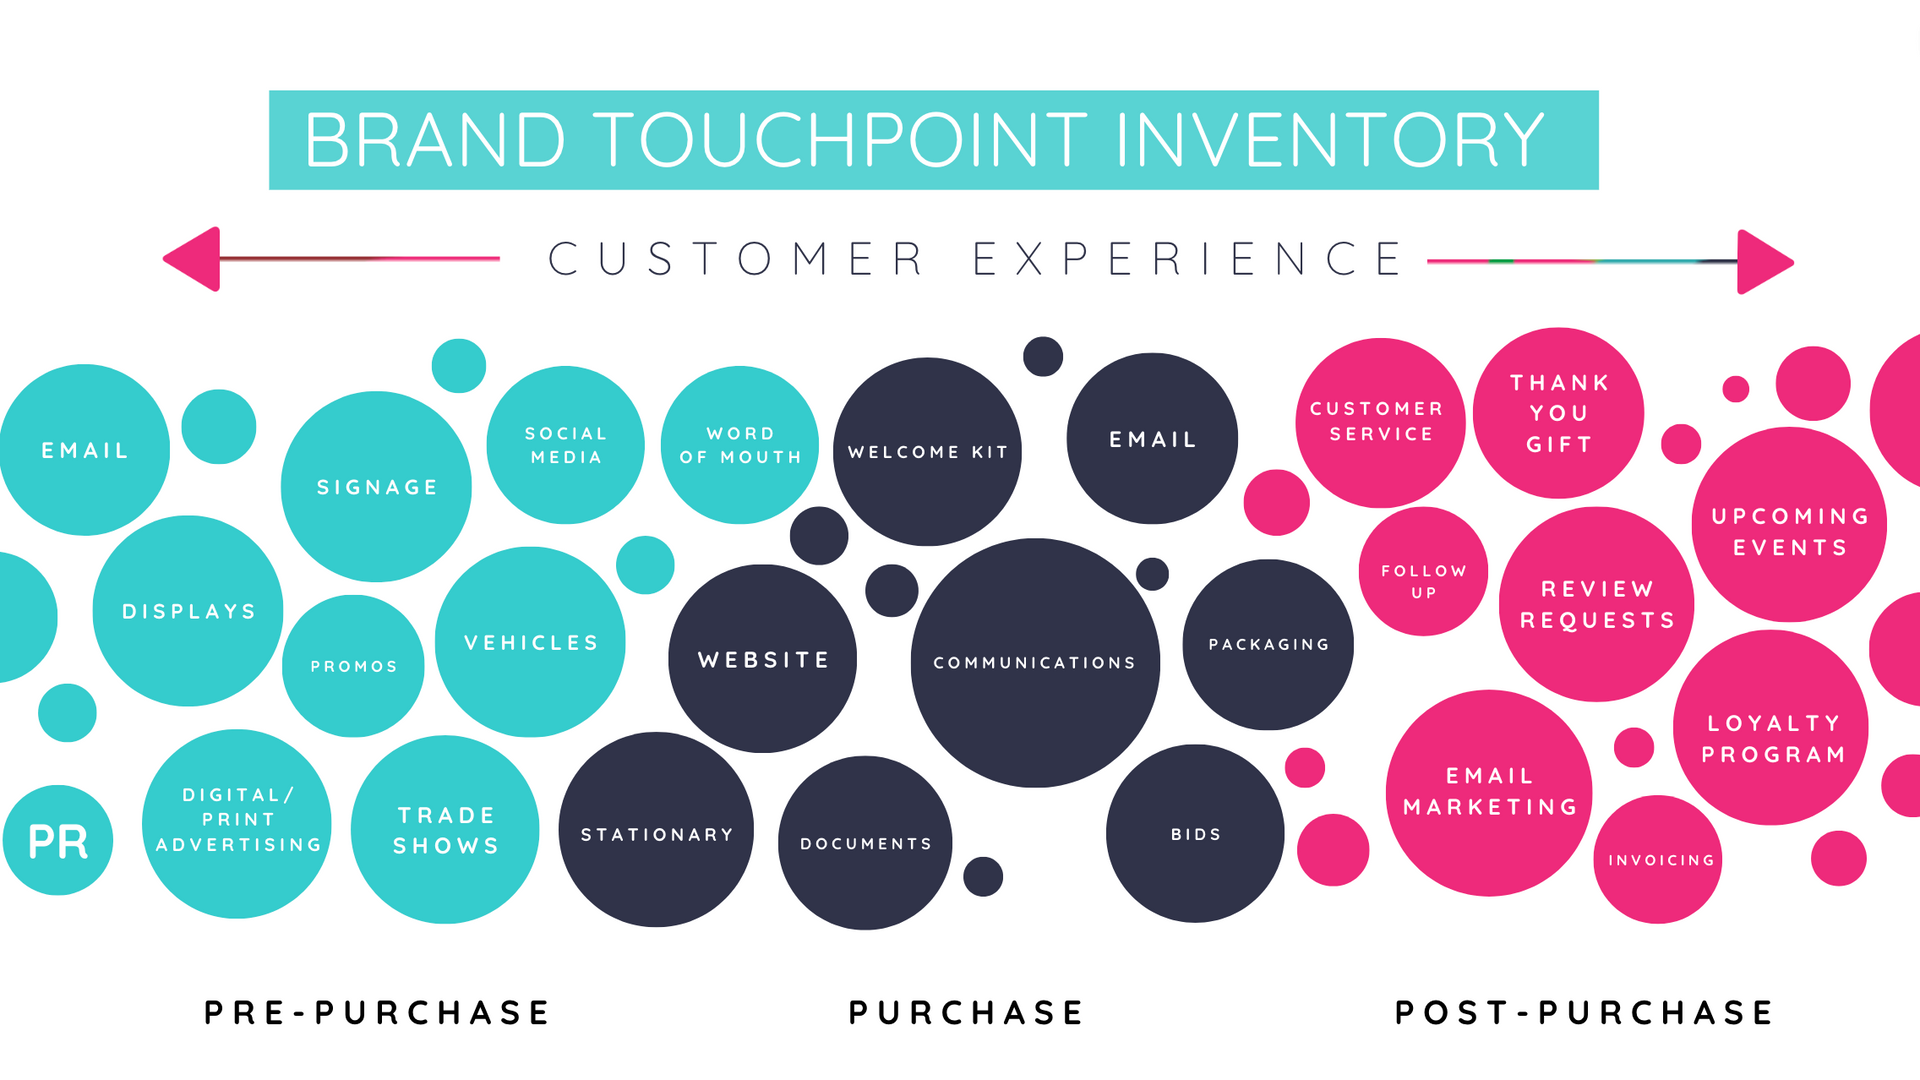 Brand Touchpoint Inventory